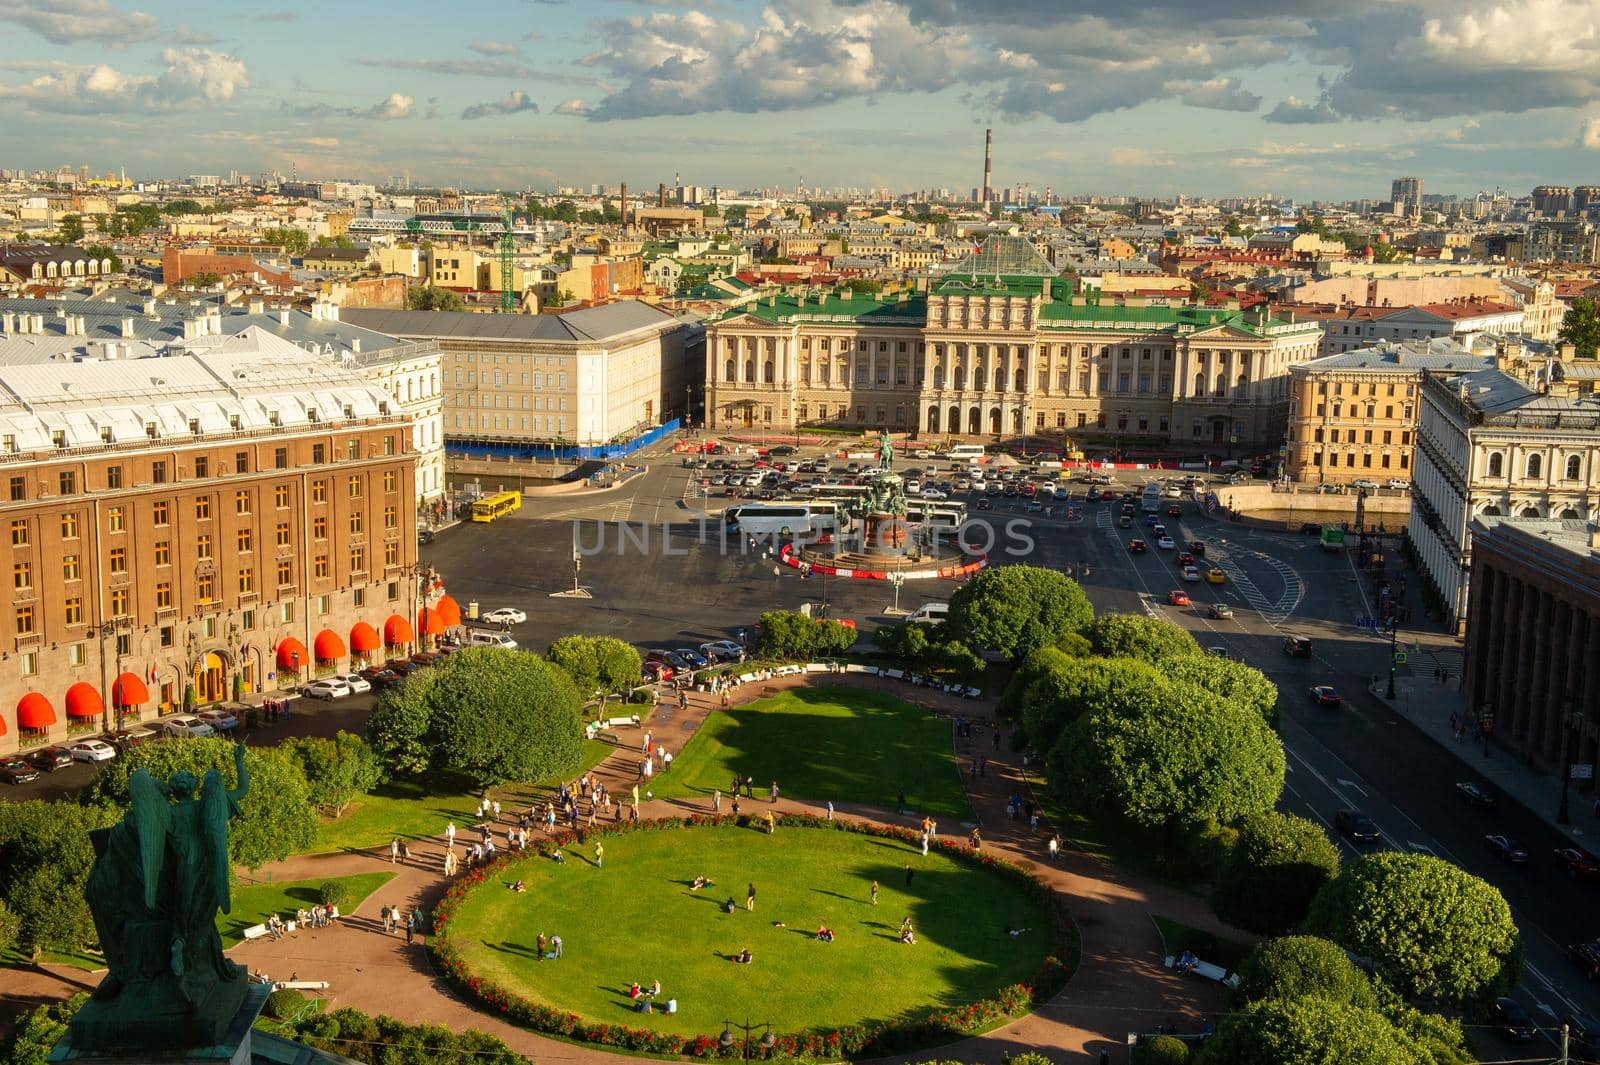 The St. Petersburg arial panorama with old historical streets and buildings is visible from the top of St. Isaac's Cathedral. Saint-Petersburg